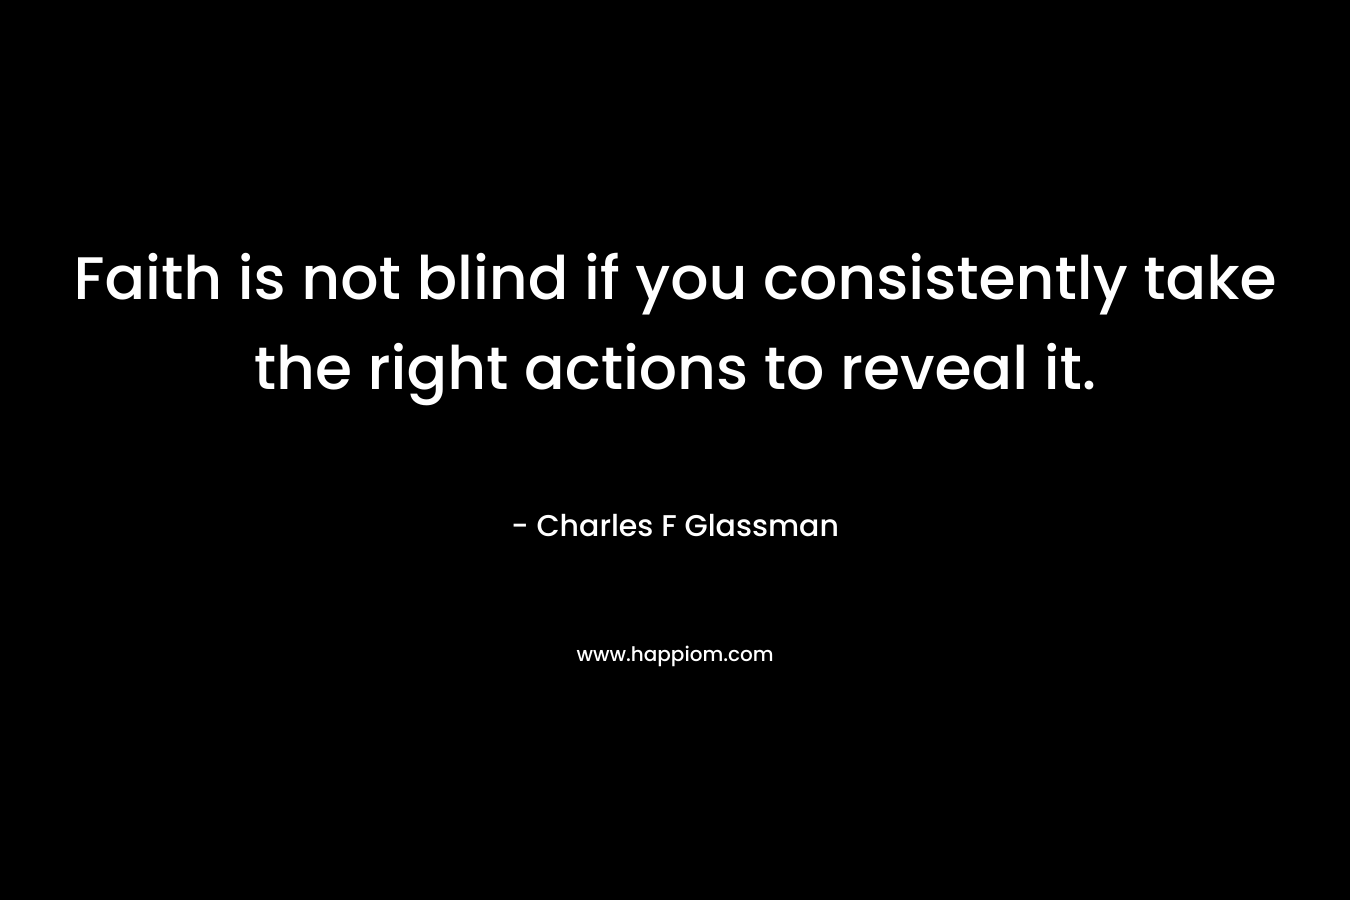 Faith is not blind if you consistently take the right actions to reveal it.